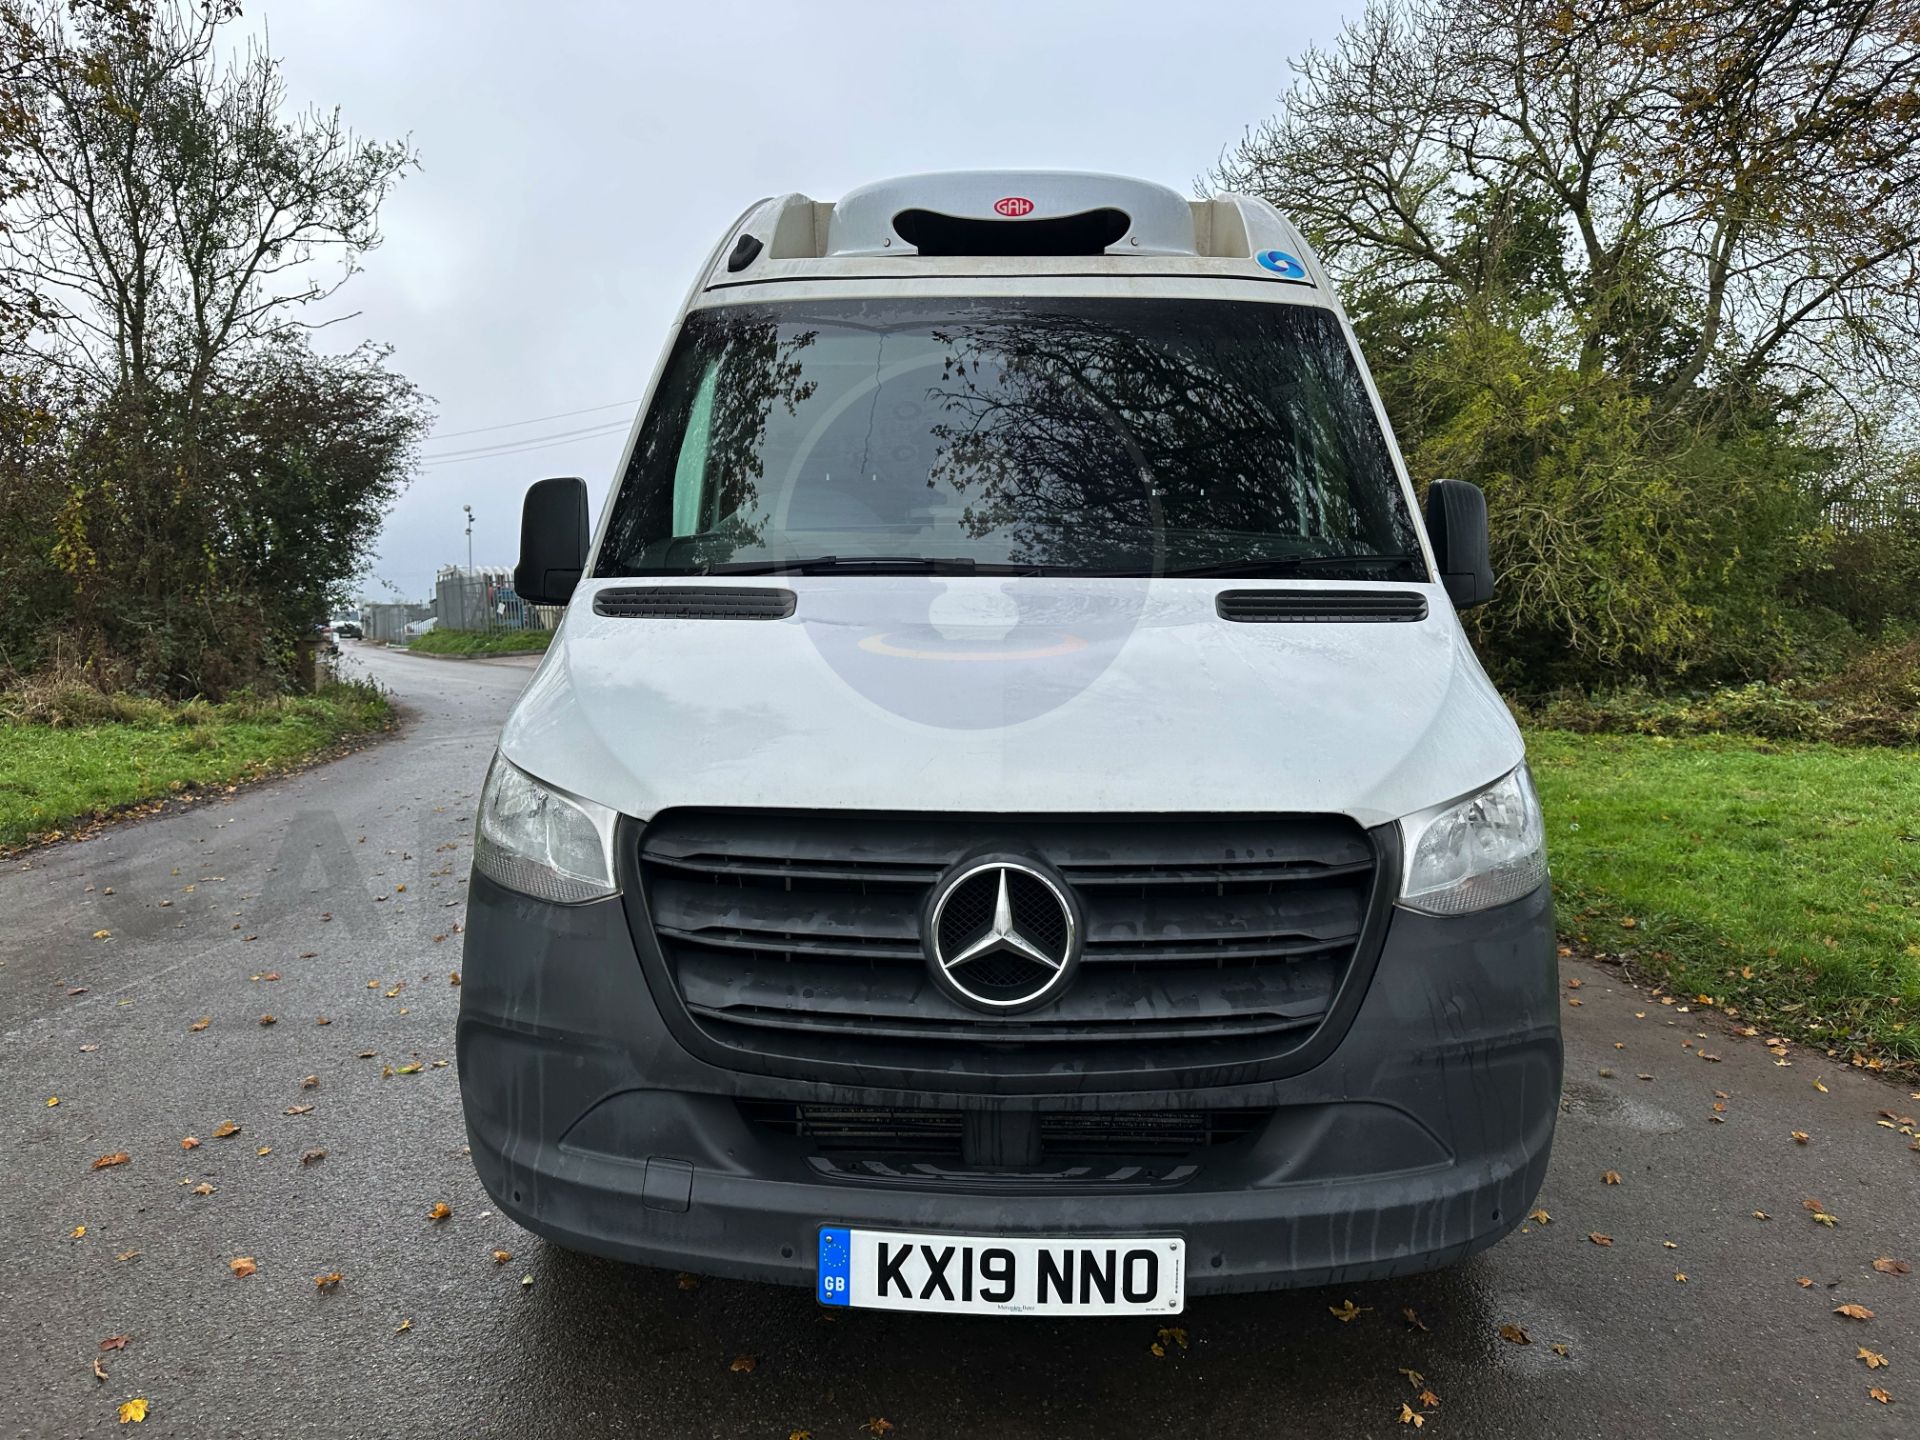 MERCEDES-BENZ SPRINTER 314 CDI *MWB - REFRIGERATED VAN* (2019 - FACELIFT MODEL) *OVERNIGHT STANDBY* - Image 4 of 45